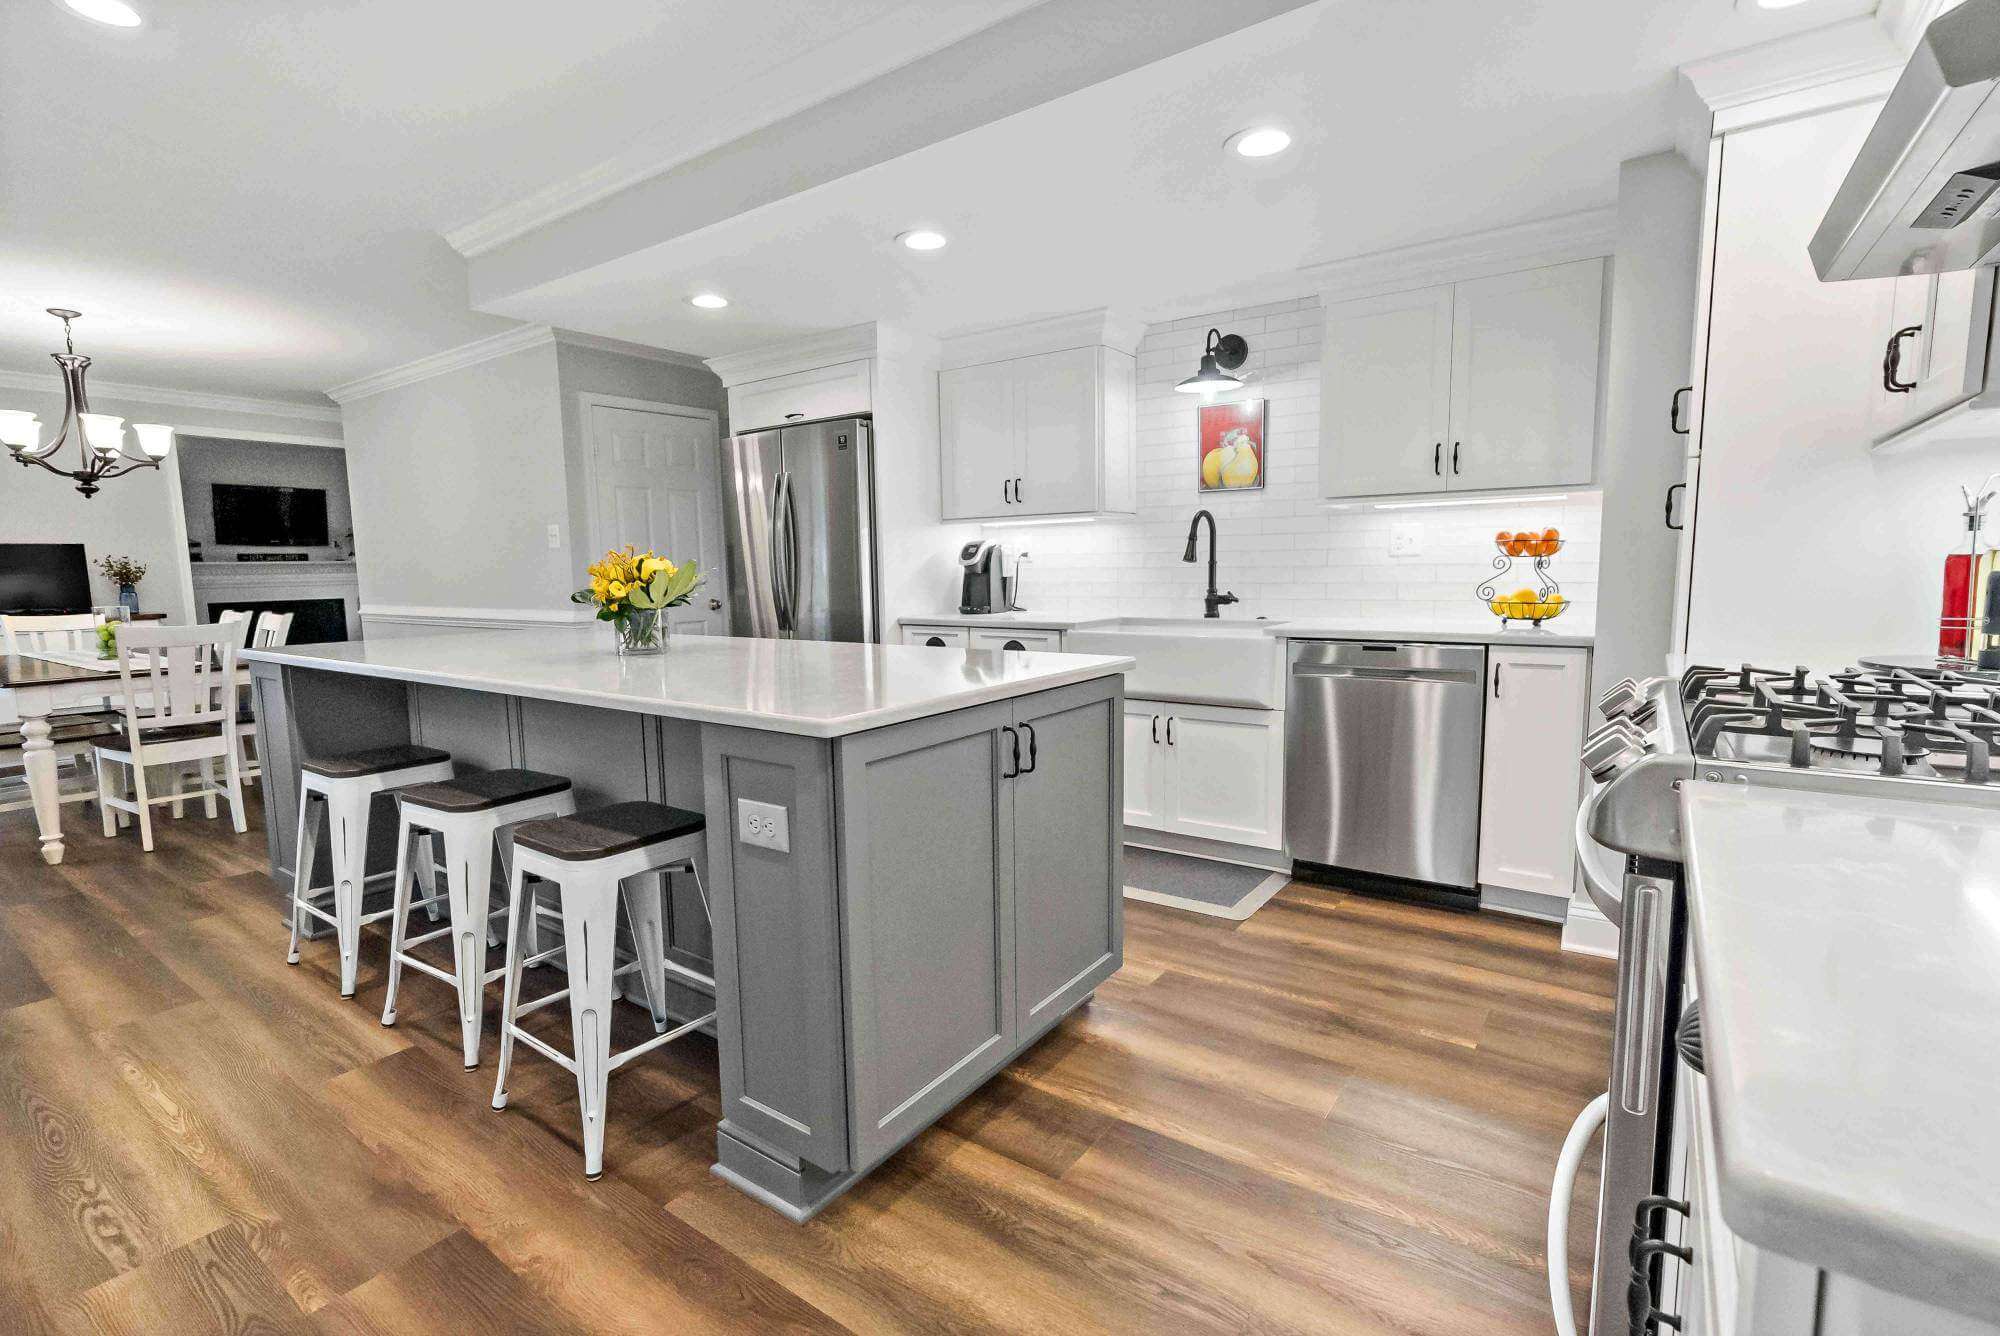 Grey kitchen island with bar stool seating